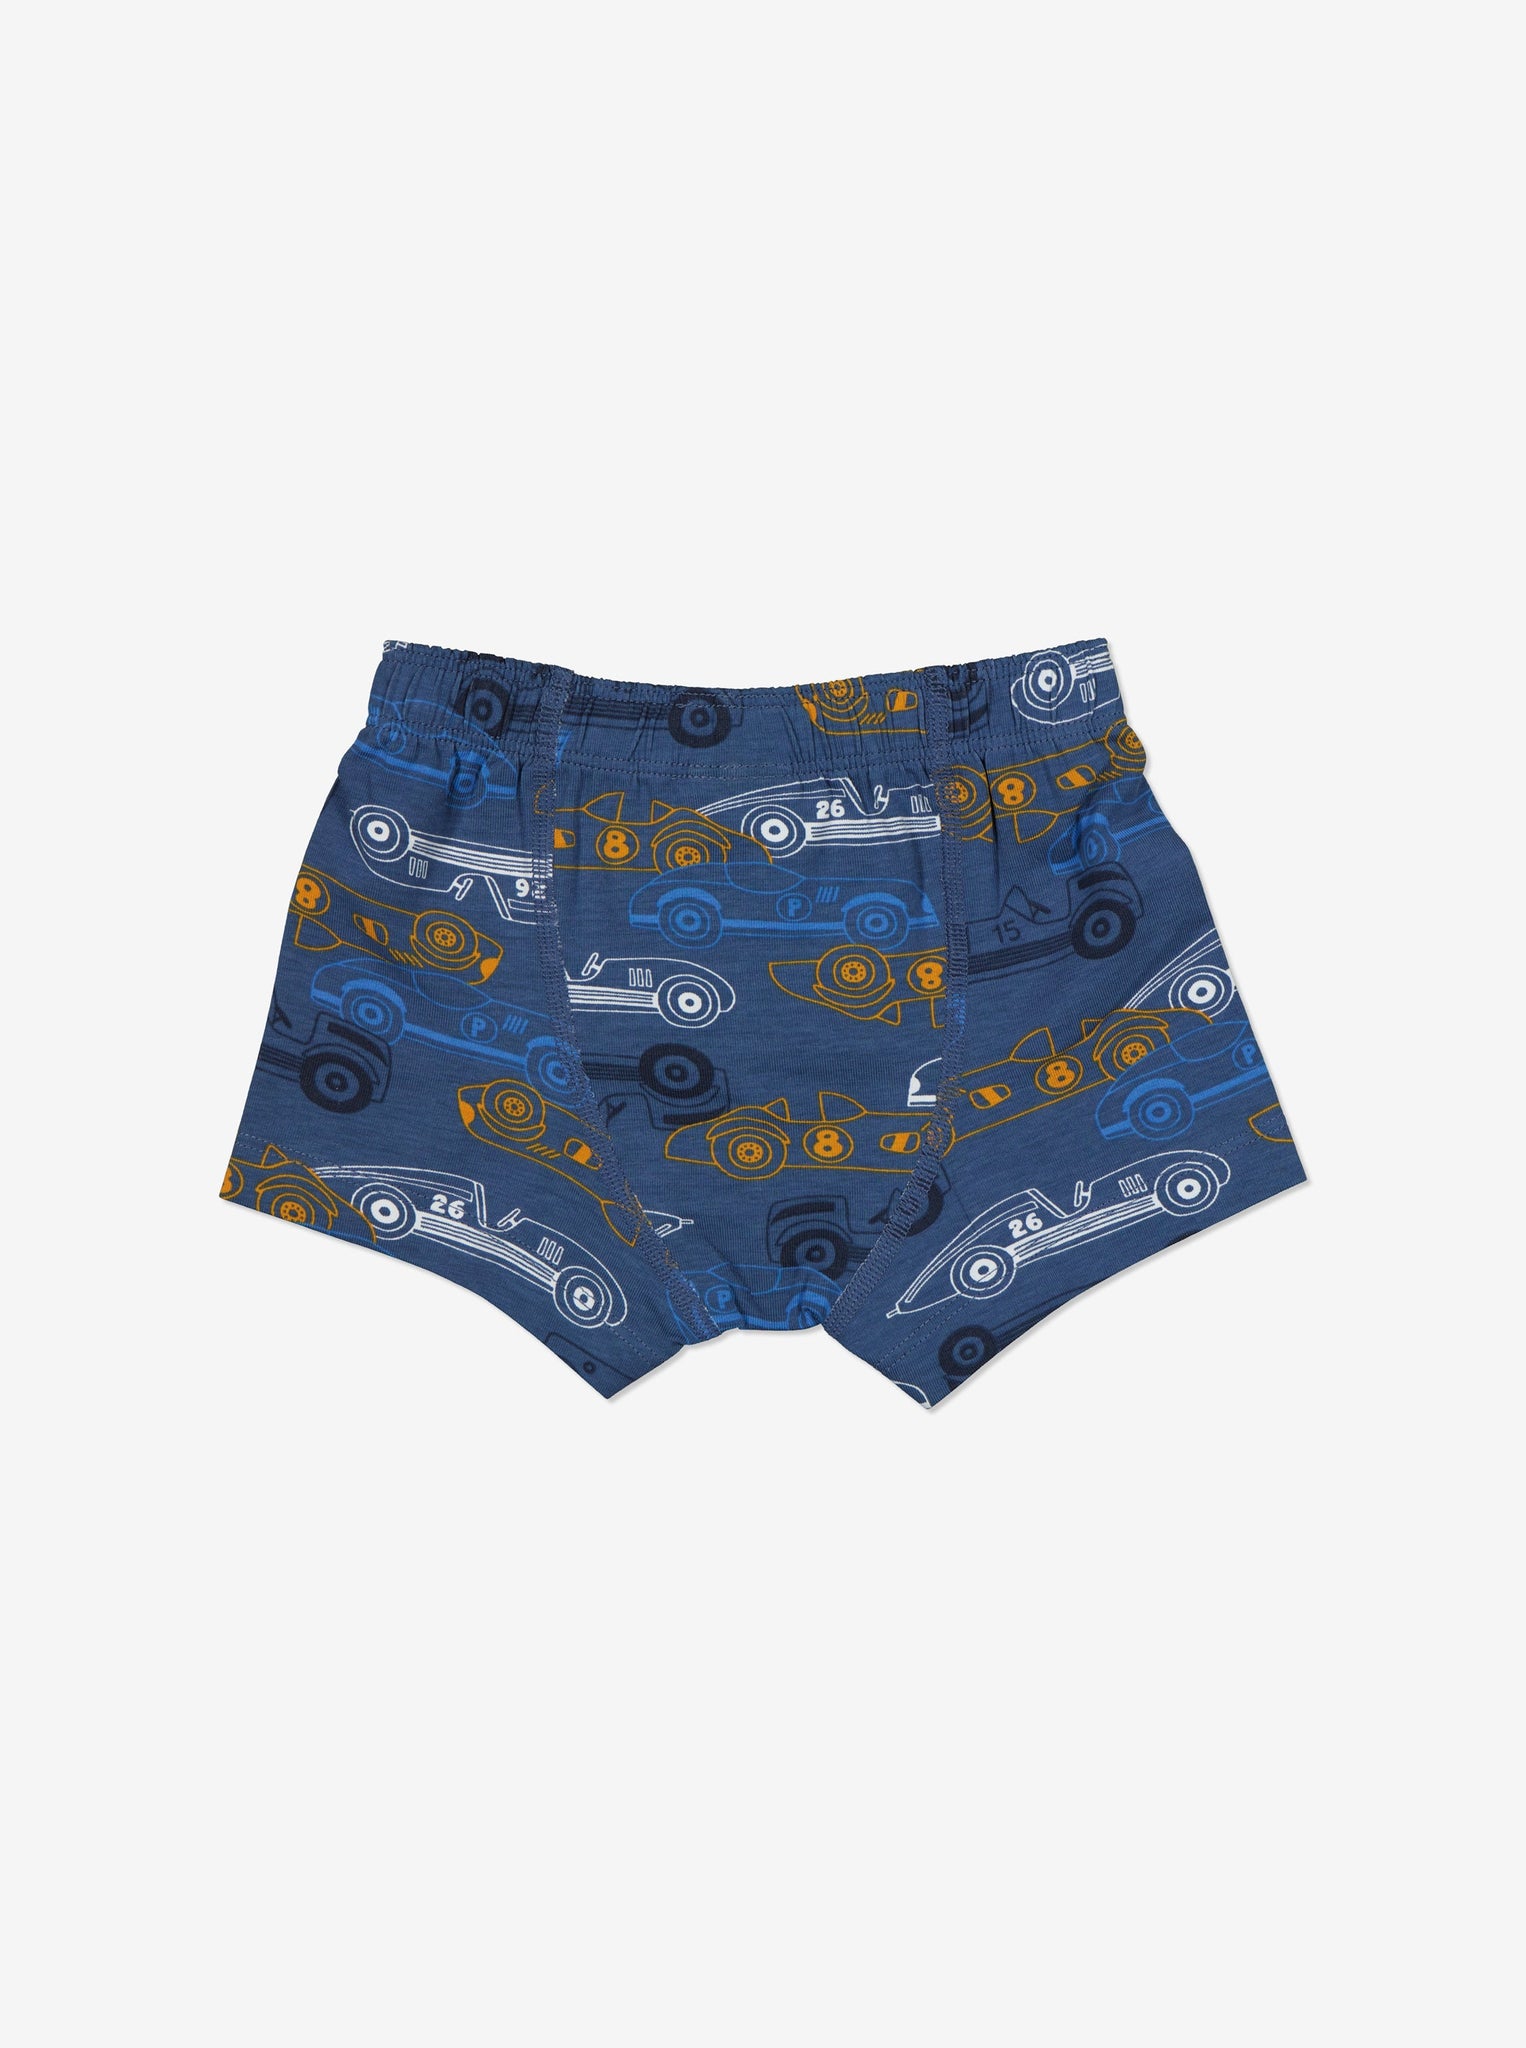 Car Print Blue Boys Boxer Shorts from the Polarn O. Pyret Kidswear collection. Clothes made using sustainably sourced materials.